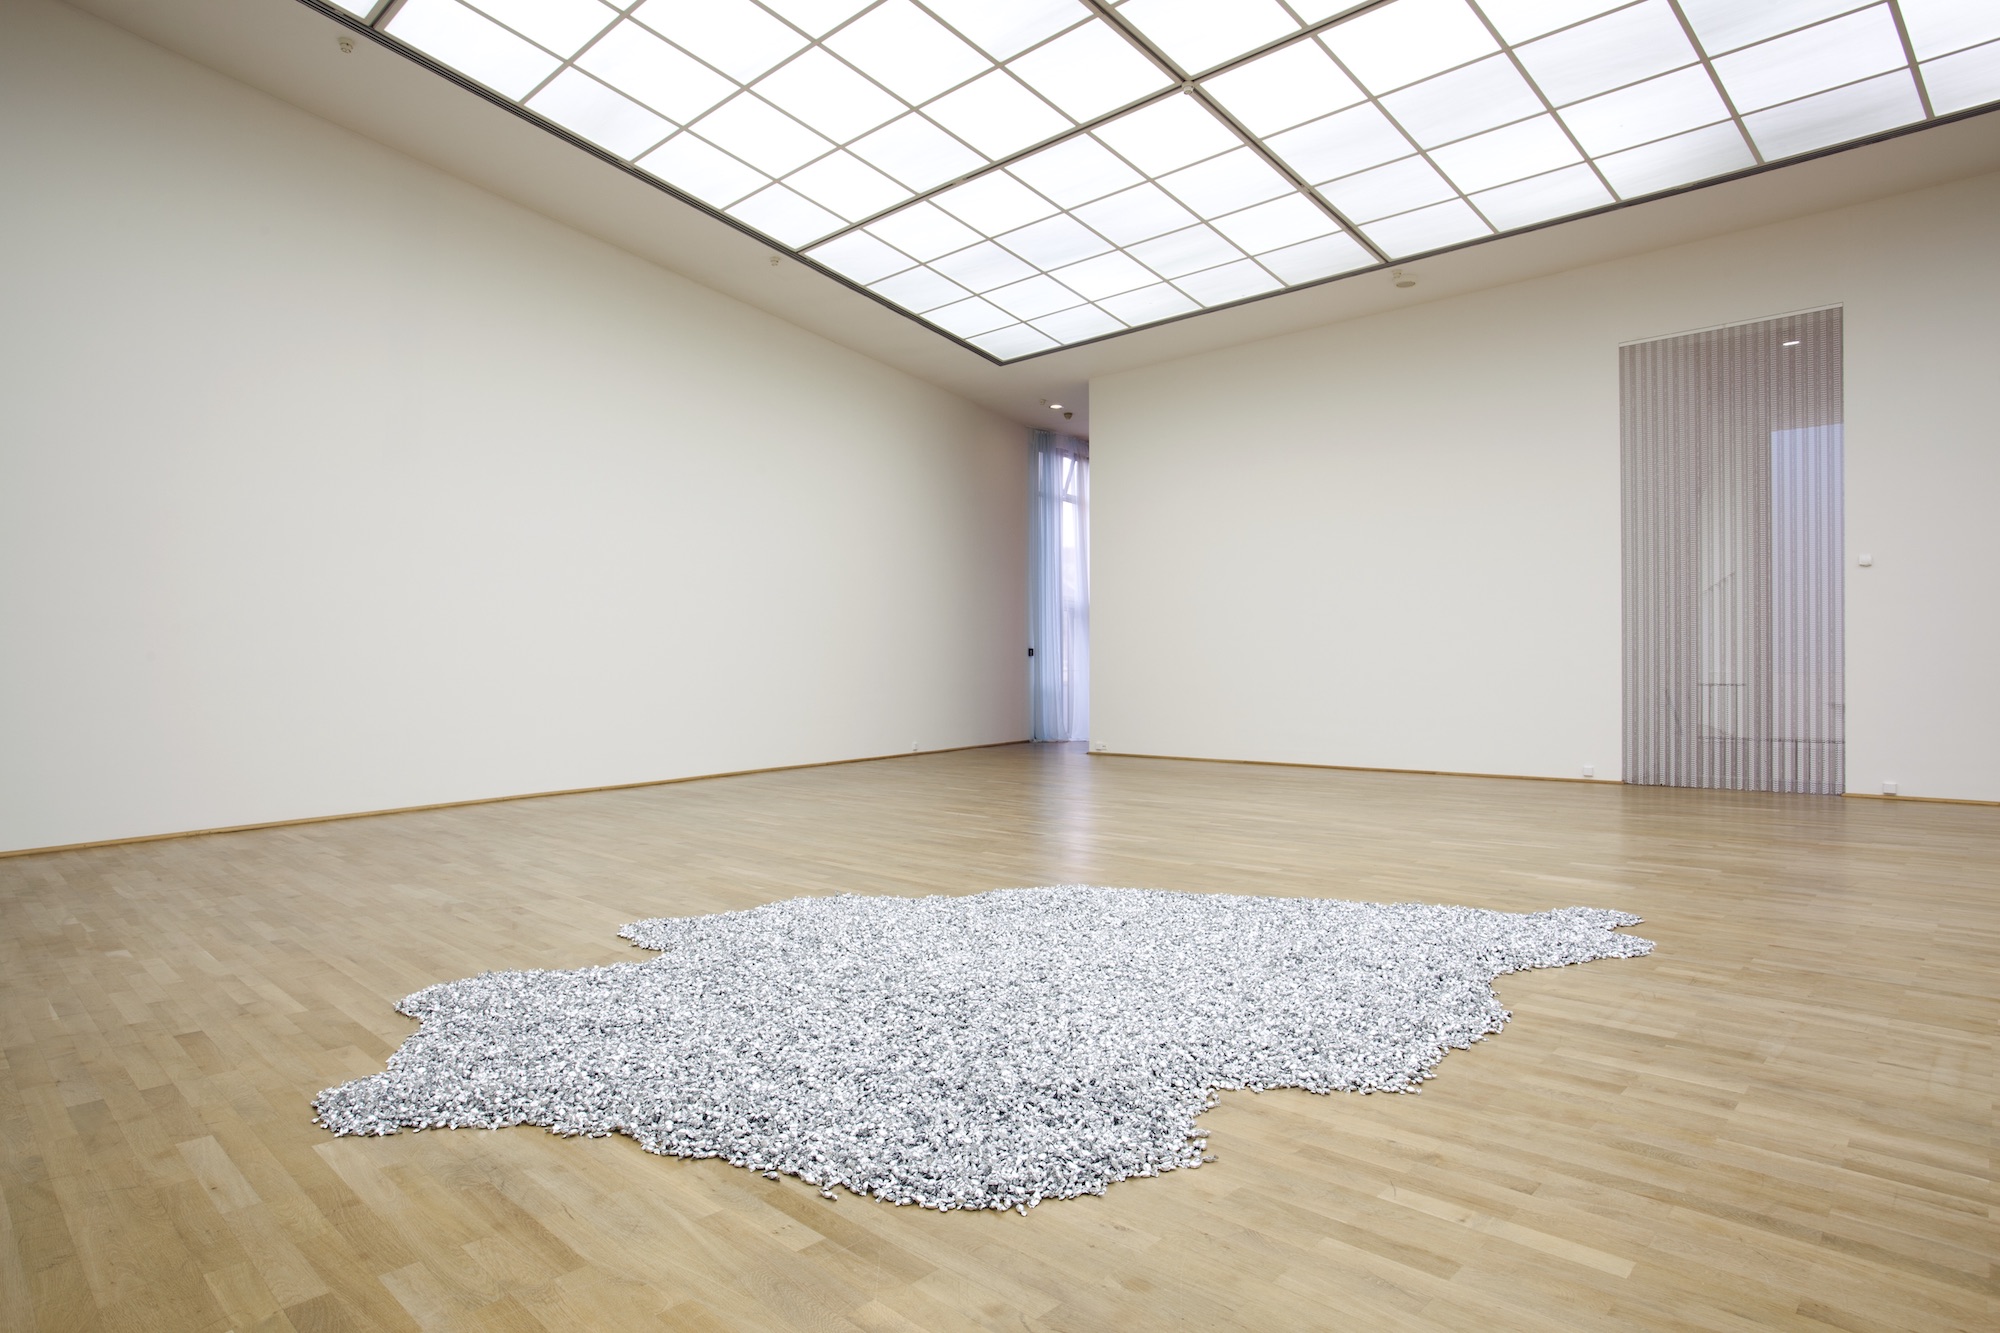 "Untitled" (Placebo), 1991. Candies in silver wrappers, endless supply. Overall dimensions vary with installation. Ideal weight: 1,000 - 1,200 lb. Â© Felix Gonzalez-Torres. Courtesy of the Felix Gonzalez-Torres Foundation. Installed in Felix Gonzalez-Torres: Specific Objects without Specific Form. MMK Museum fuÌˆr Moderne Kunst, Frankfurt, Germany. 28 Jan. â€“ 14 Mar. 2011. Photo: Axel Schneider, Frankfurt-am-Main